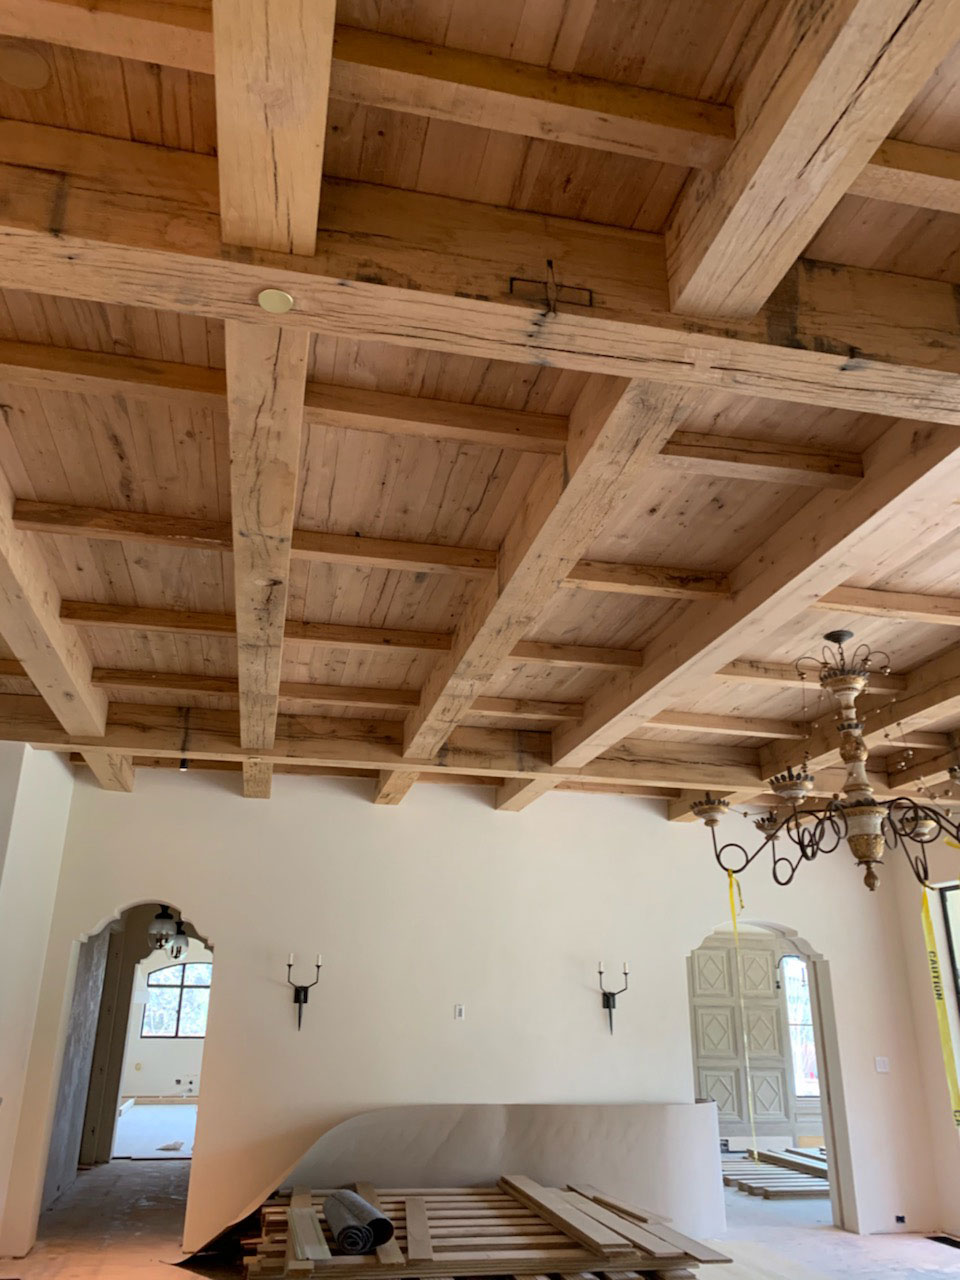 Triple B Enterprises The Reclaimed Timber Company Beams - Your Source For Reclaimed Lumber